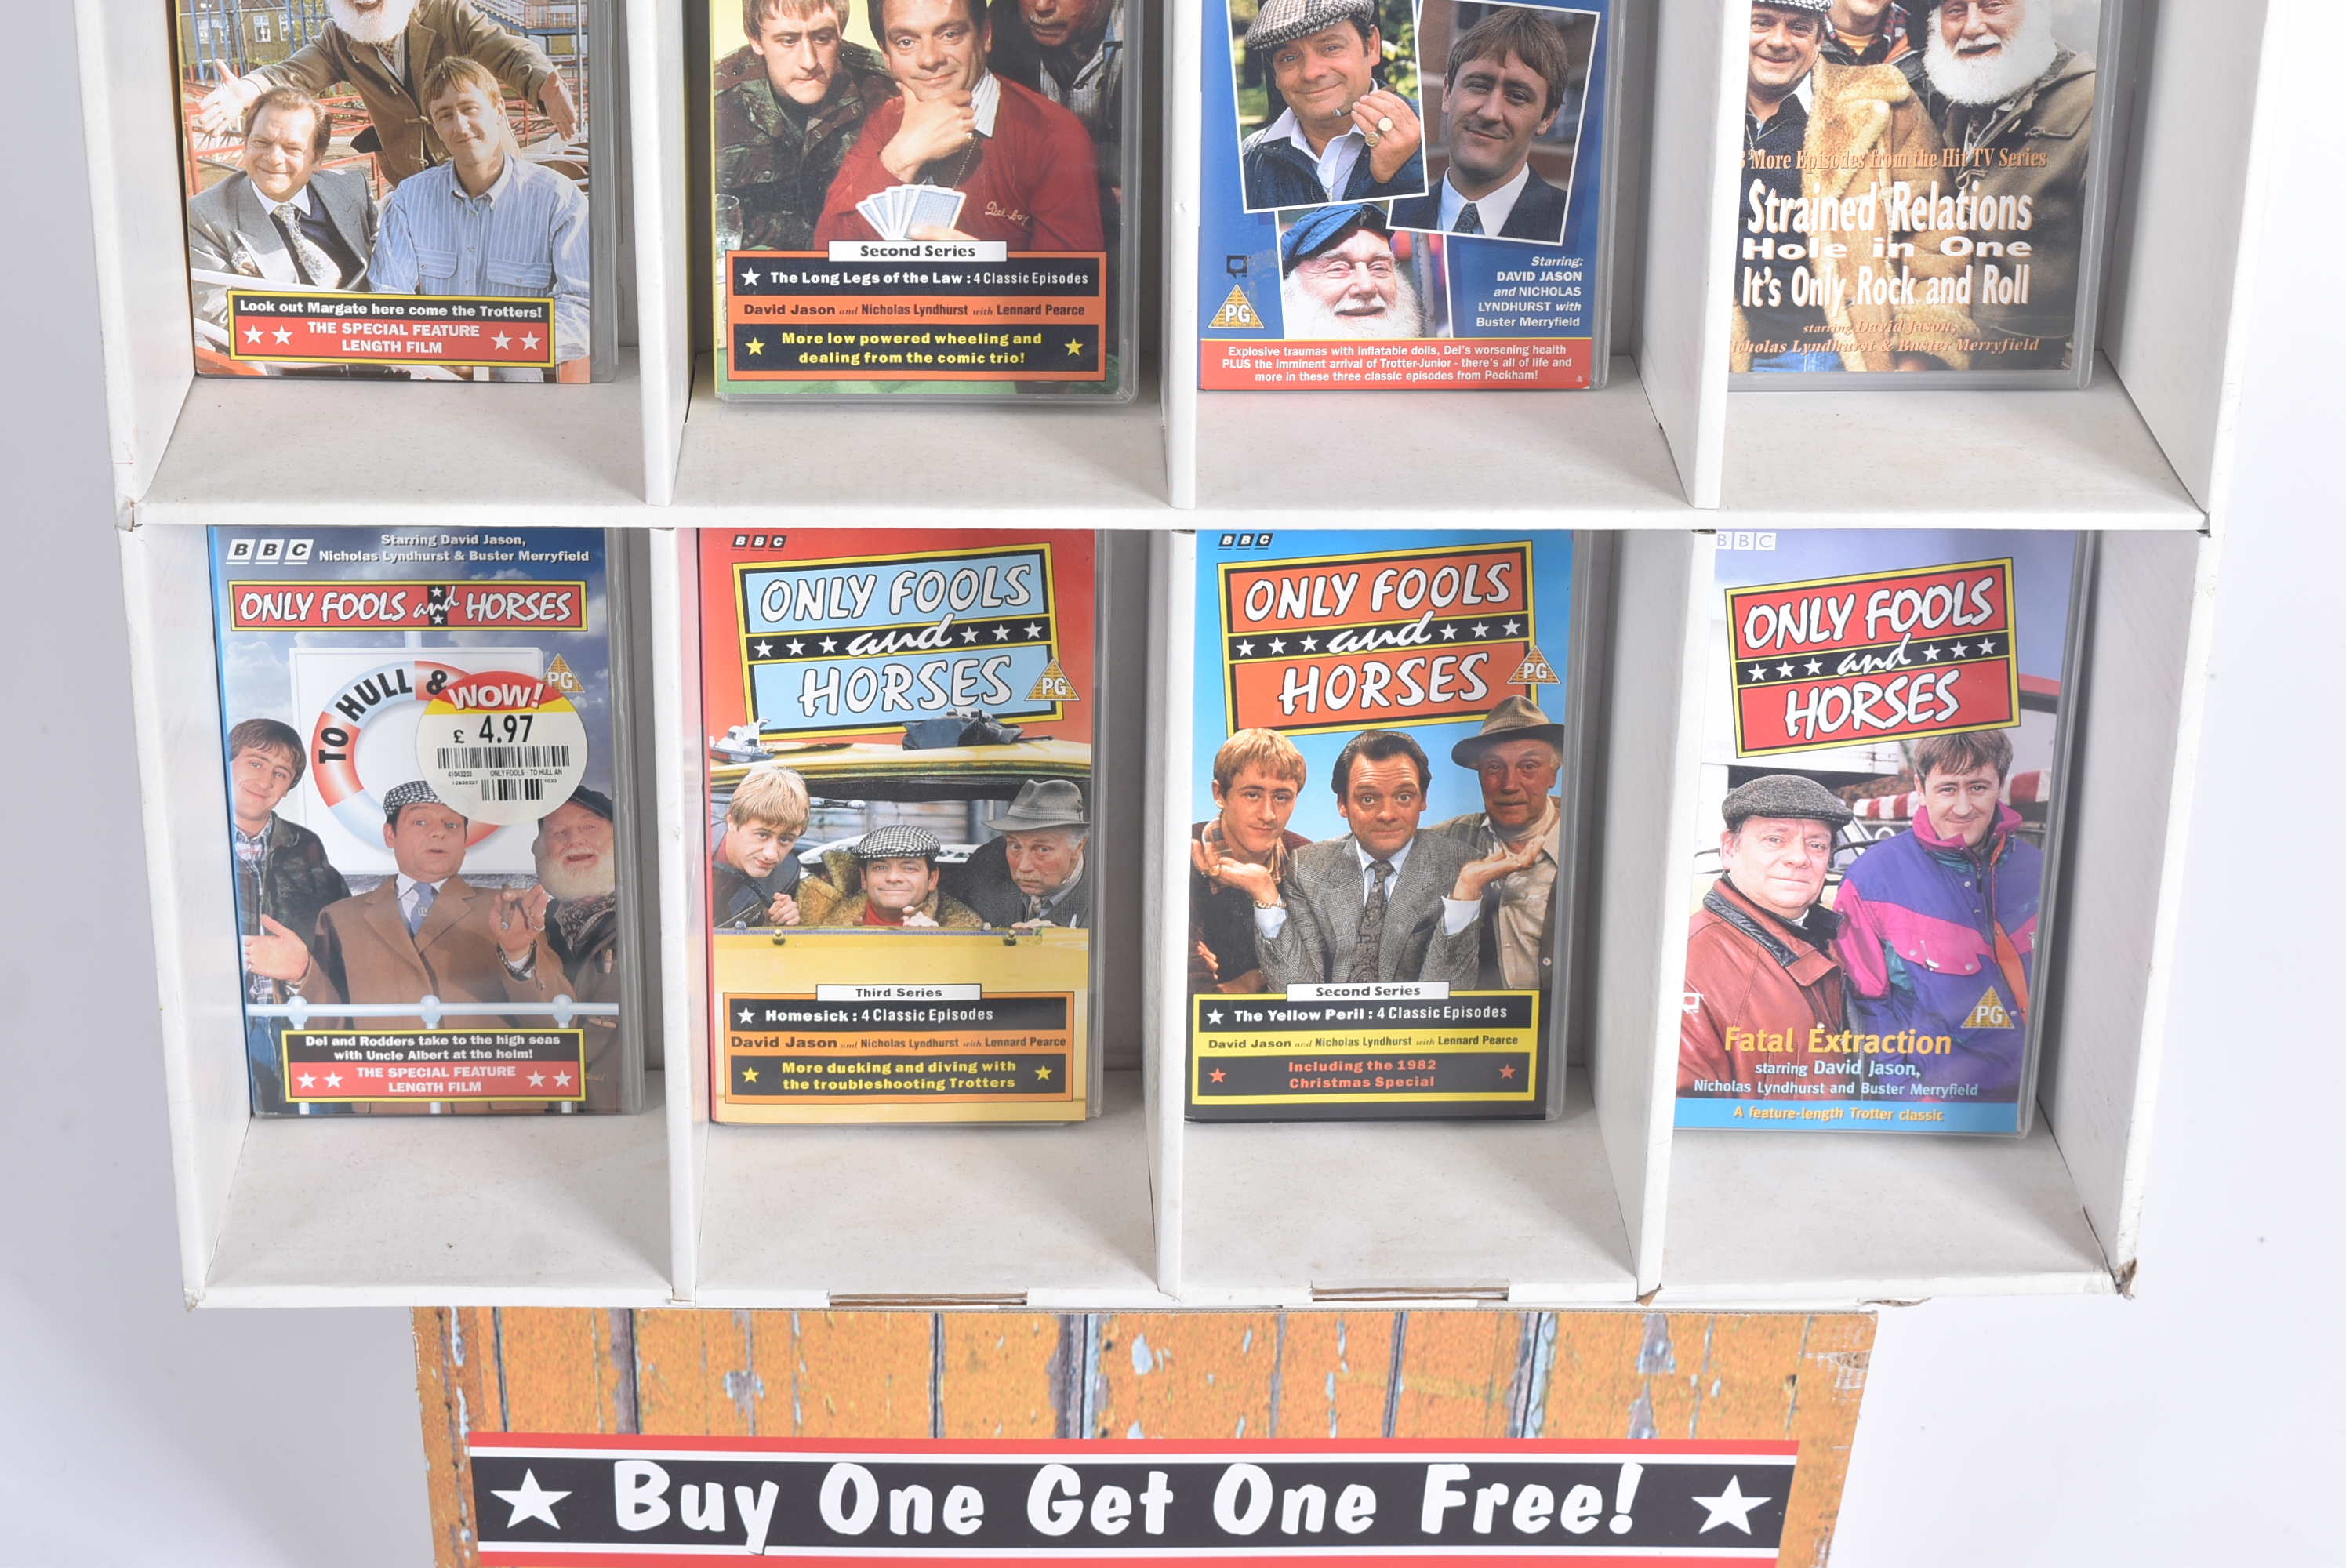 ONLY FOOLS & HORSES - ORIGINAL IN-STORE VHS DISPLAY STAND - Image 4 of 5